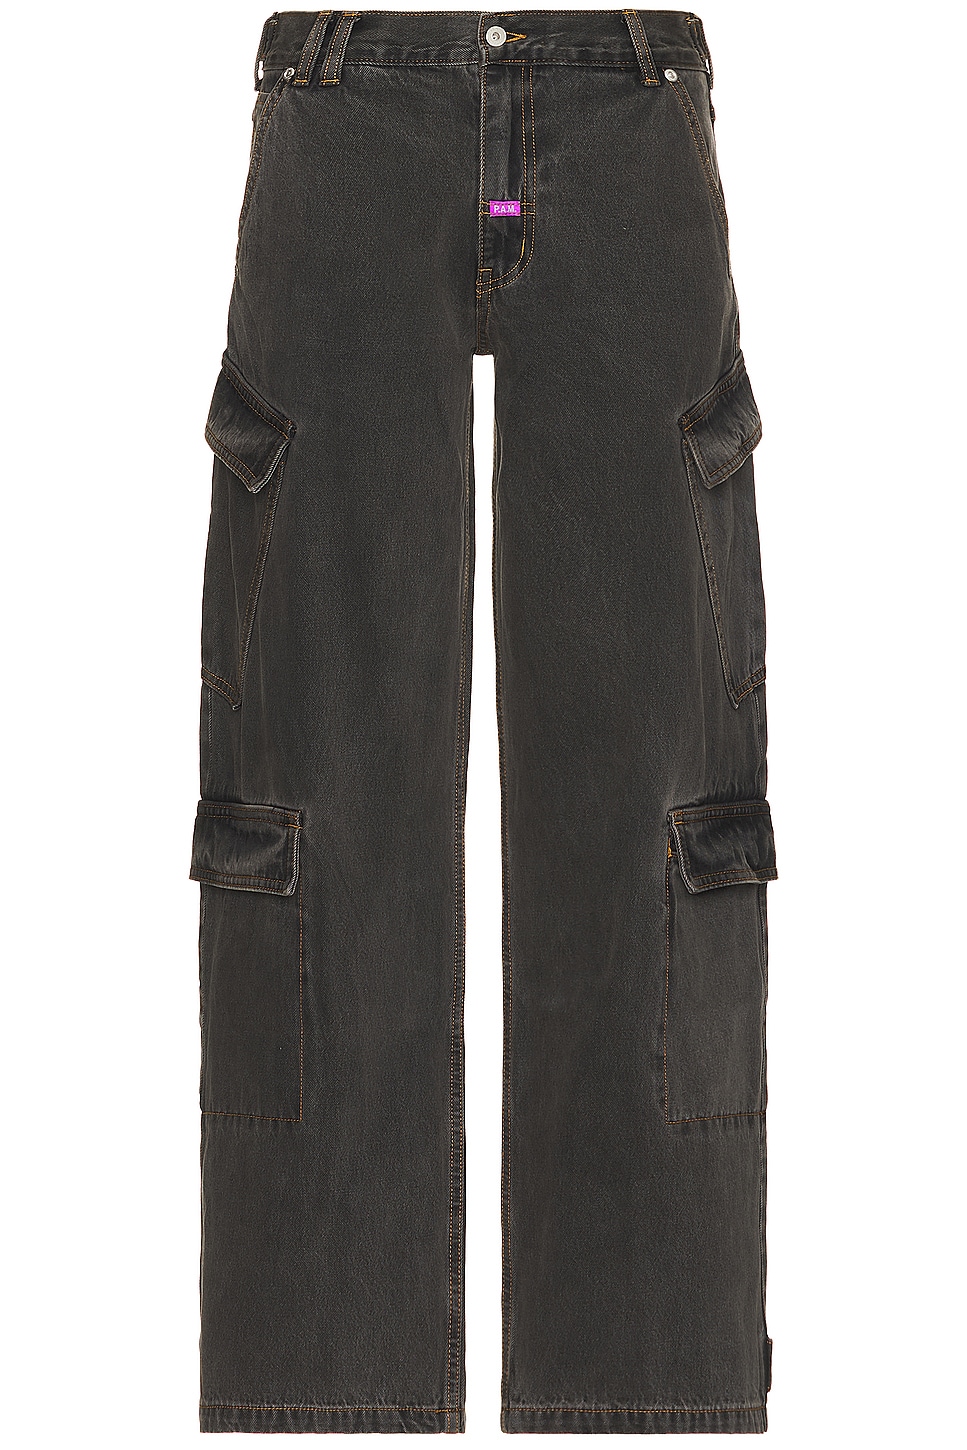 Image 1 of P.A.M. Perks and Mini Marpi Cyclopes Jean in Black Wash